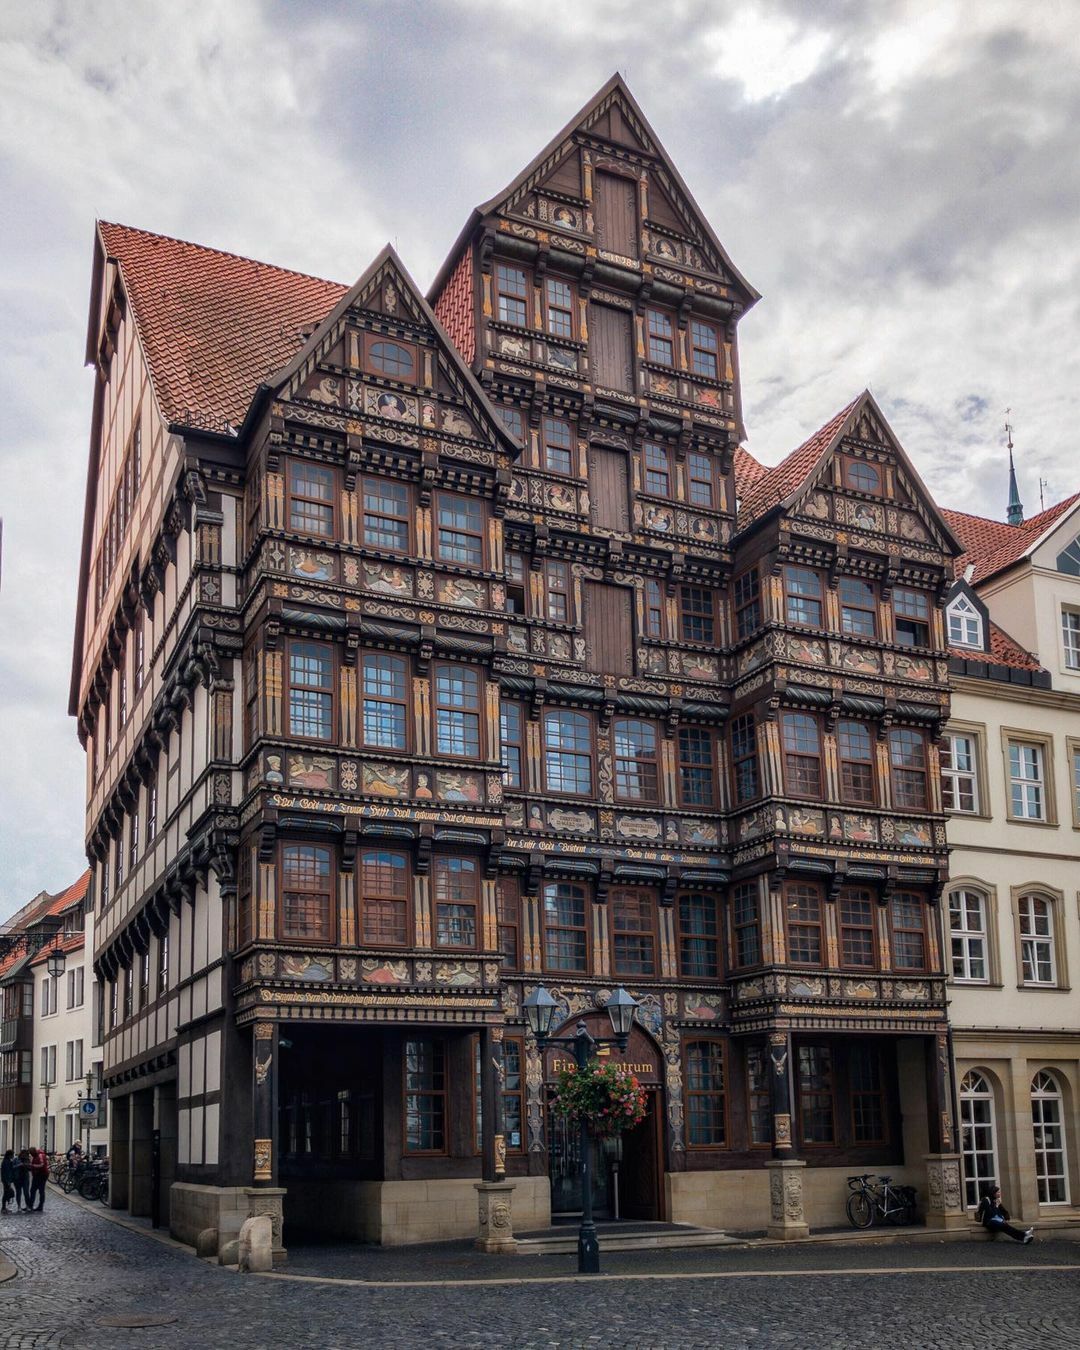 Wedekindhaus, A Half-Timbered Renaissance Style House With Carved Oak Facade Originally Built In 1598 By The Merchant Hans Storre, Then Completely Destroyed During A Wwii Air Raid Before Being Rebuilt In The 1980s. Hildesheim, Lower Saxony, Germany